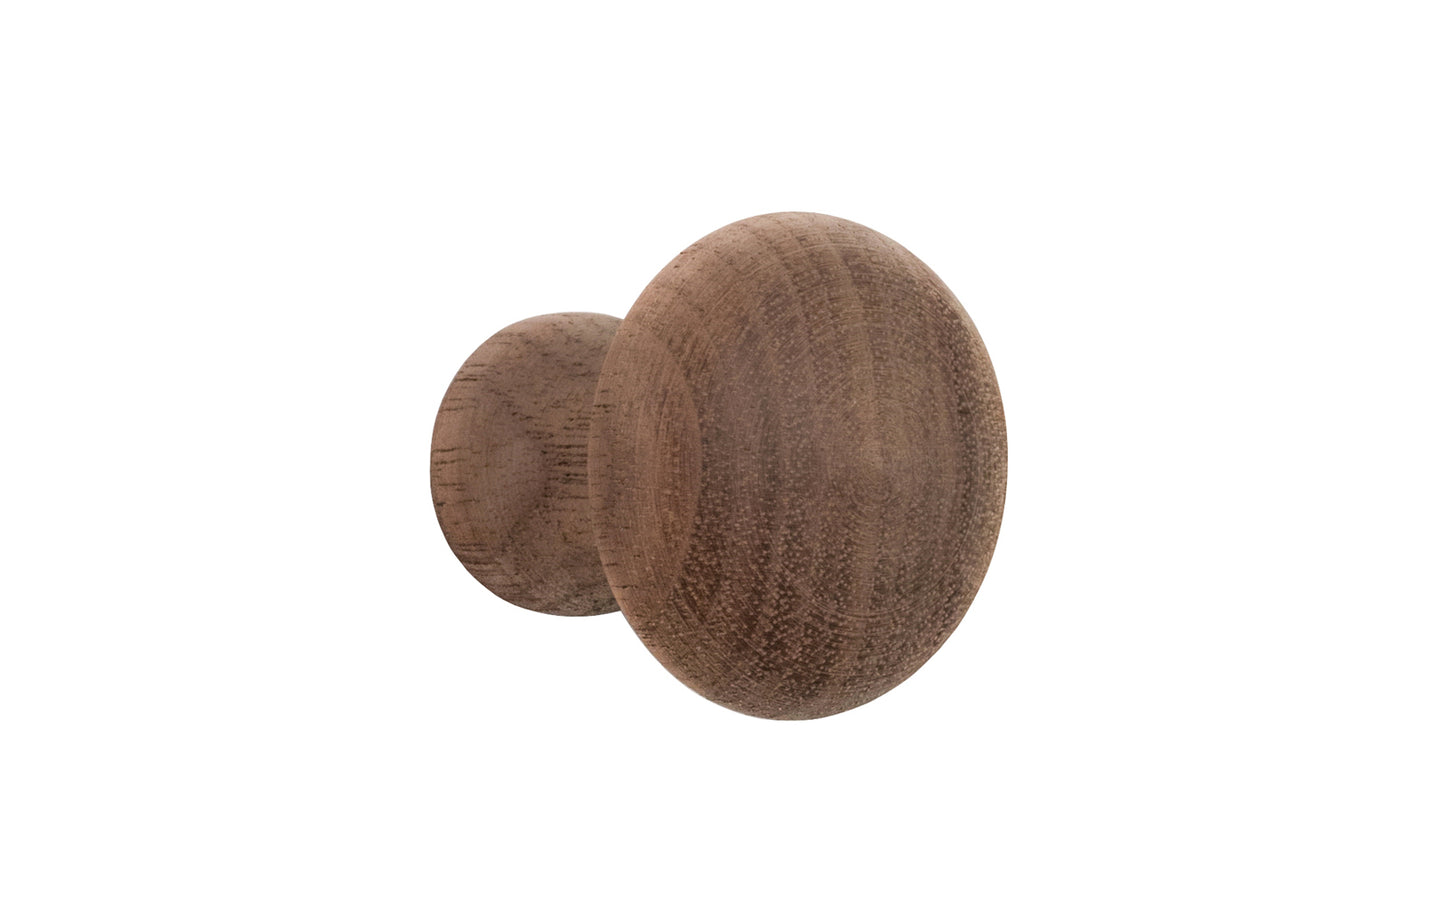 Classic & traditional Shaker-style solid wood cabinet knobs. Walnut Wood Knob. These charming wood knobs have a smooth & attractive look & feel. Wooden shaker knob for cabinets, drawers, & furniture. Unfinished mushroom shape wood knob.